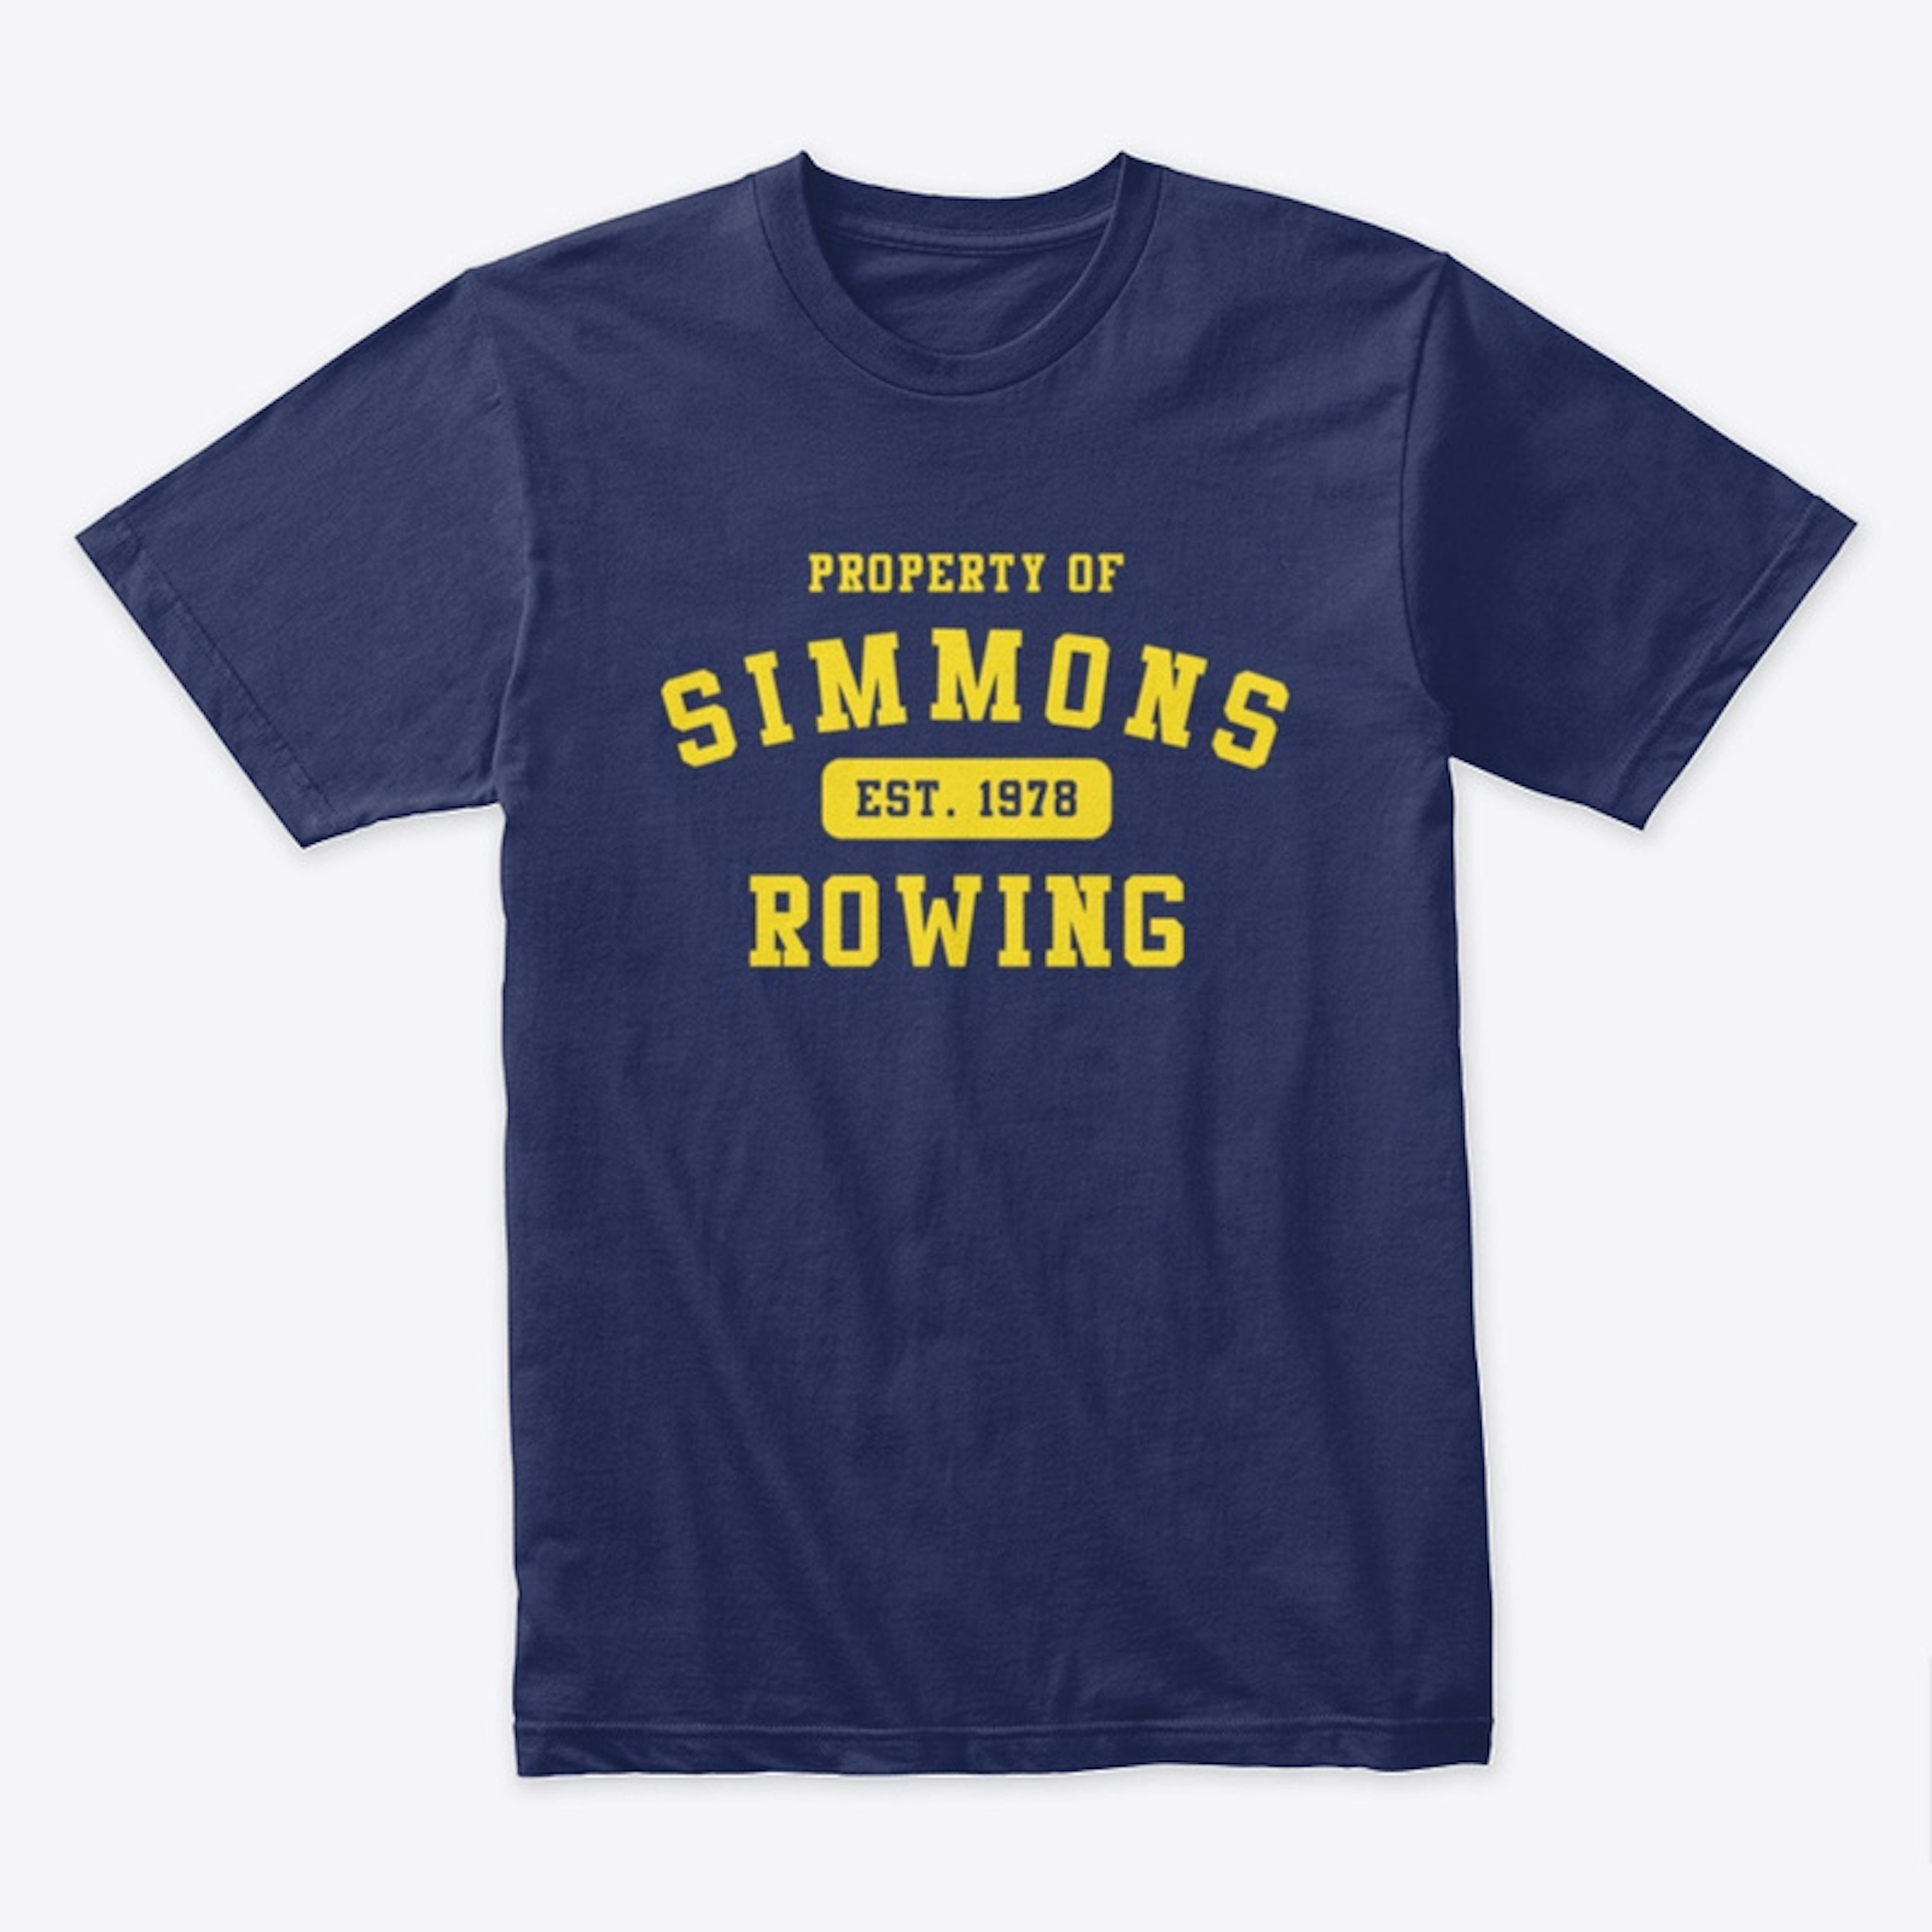 Property of Simmons Rowing Tee